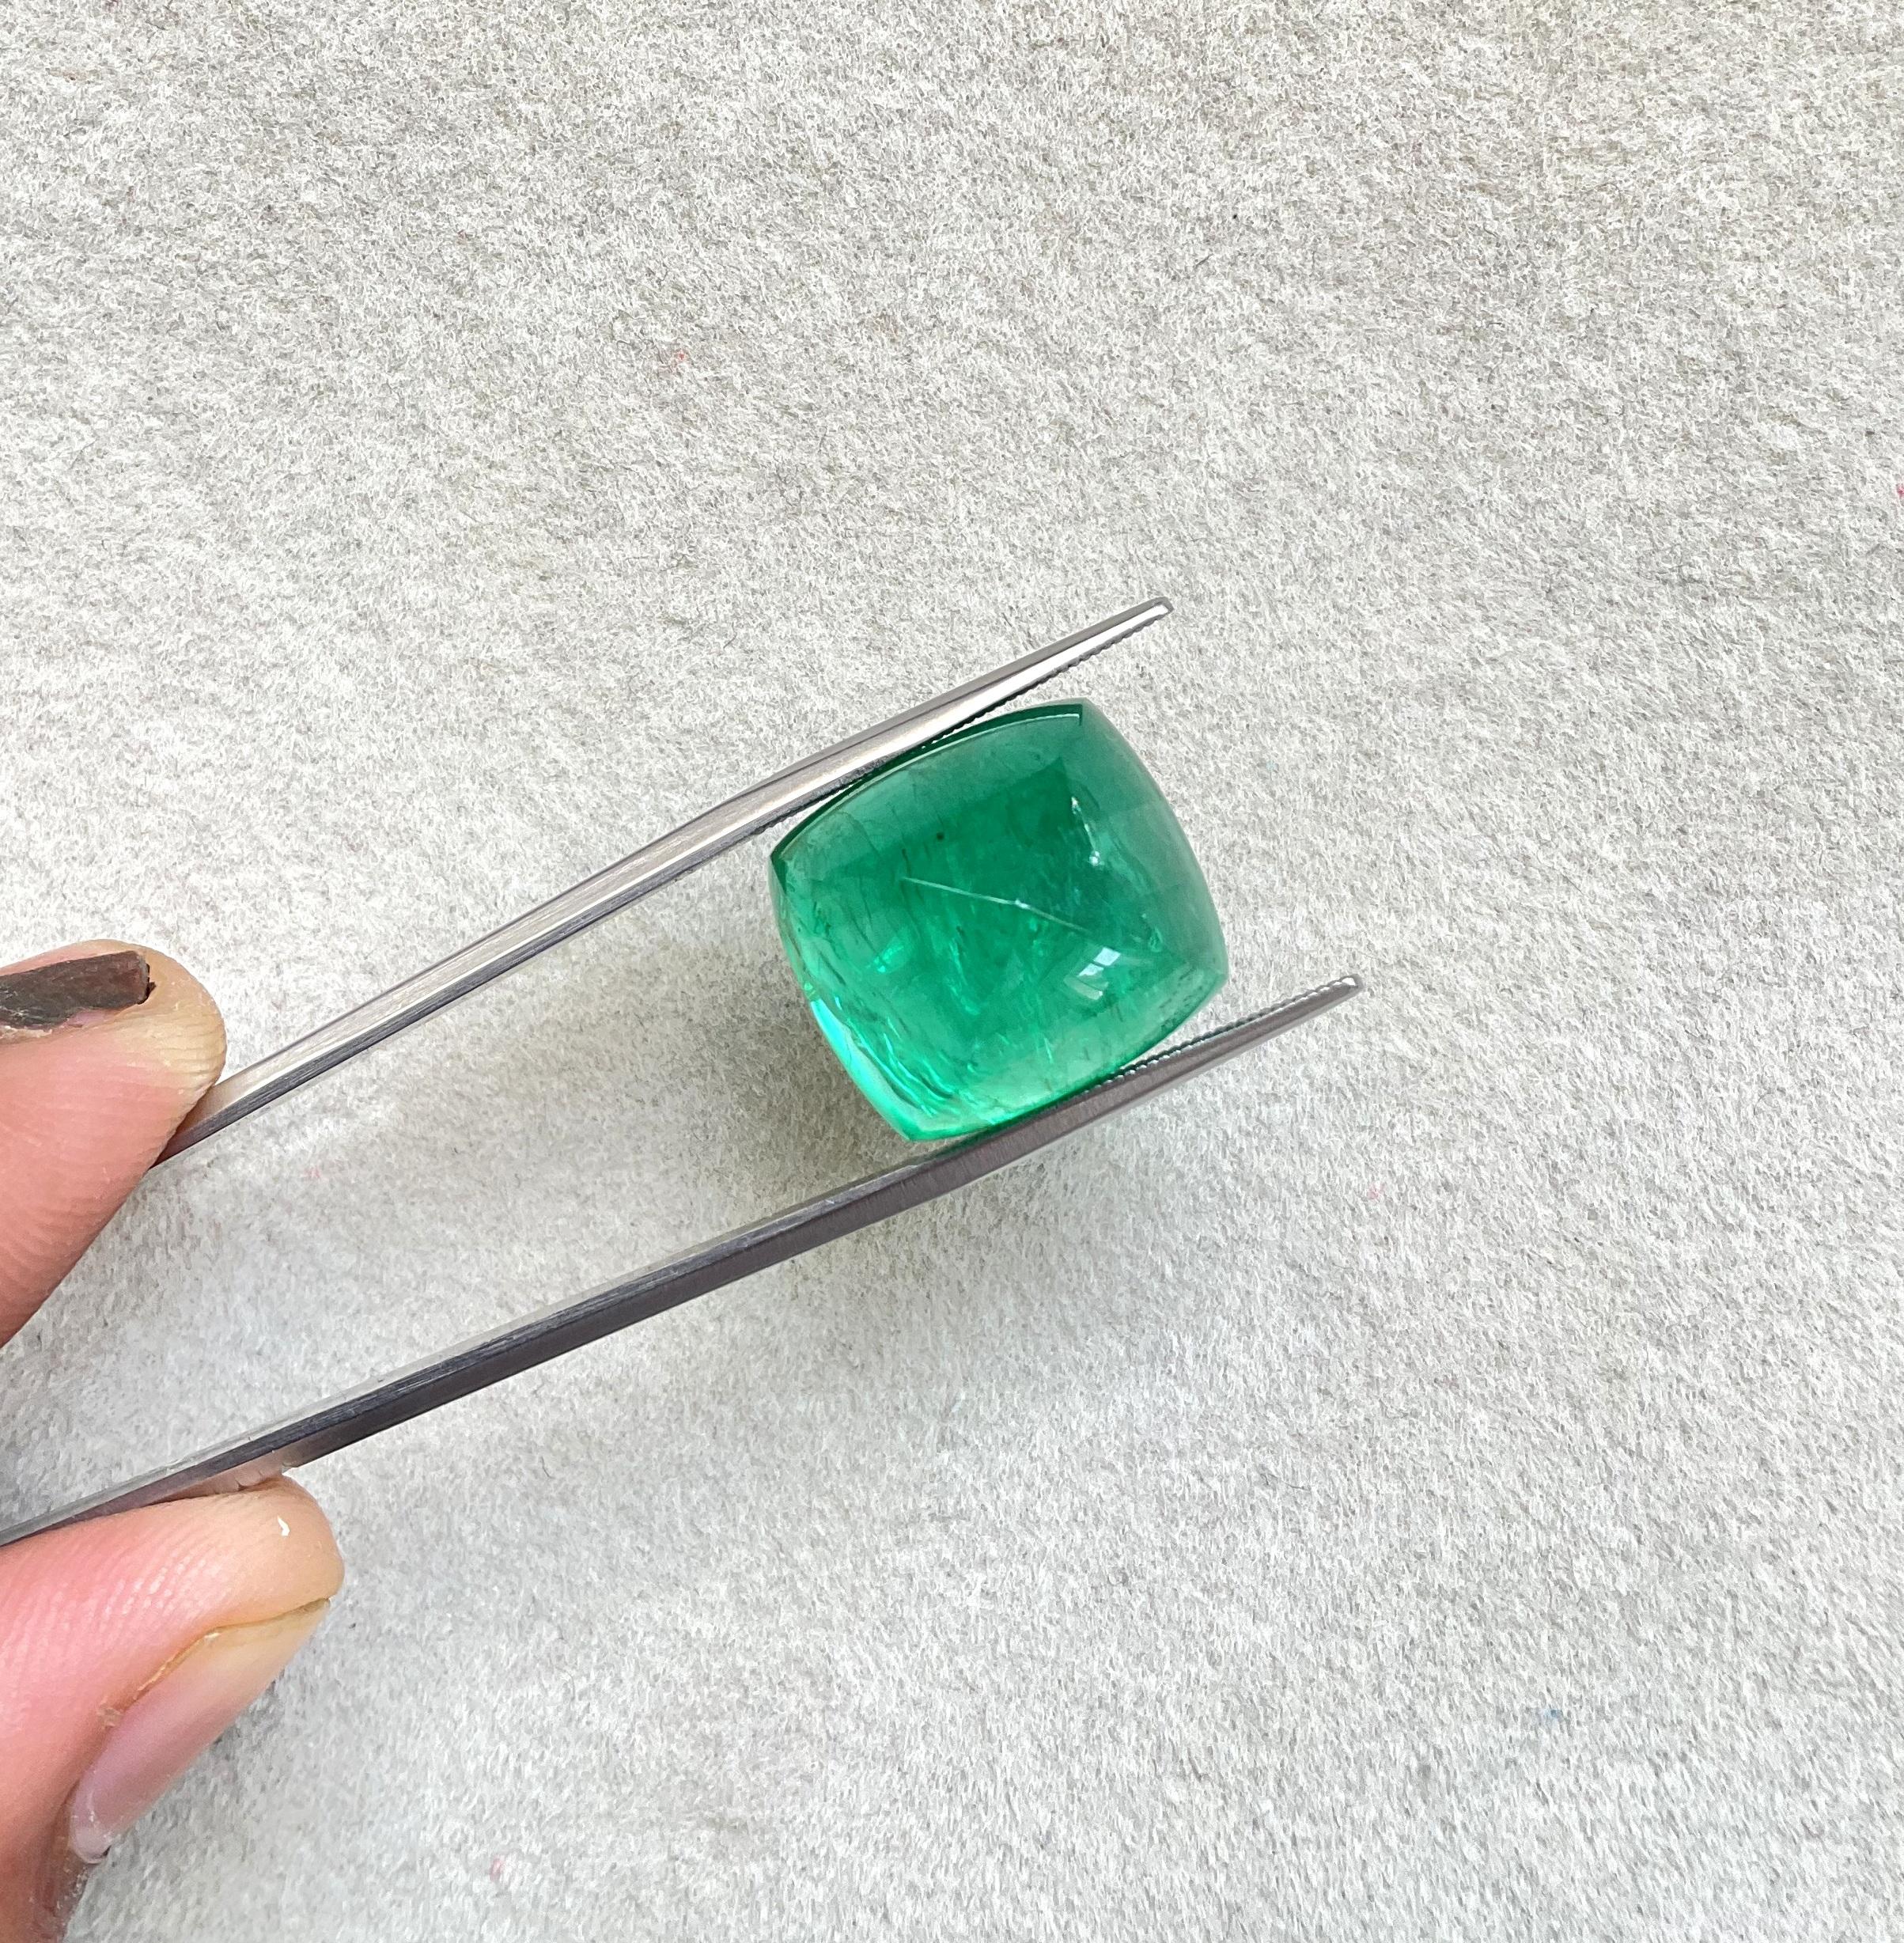 Certified 25.38 Cts Zambian Emerald Sugarloaf Cabochon Top Quality Natural Gem For Sale 4